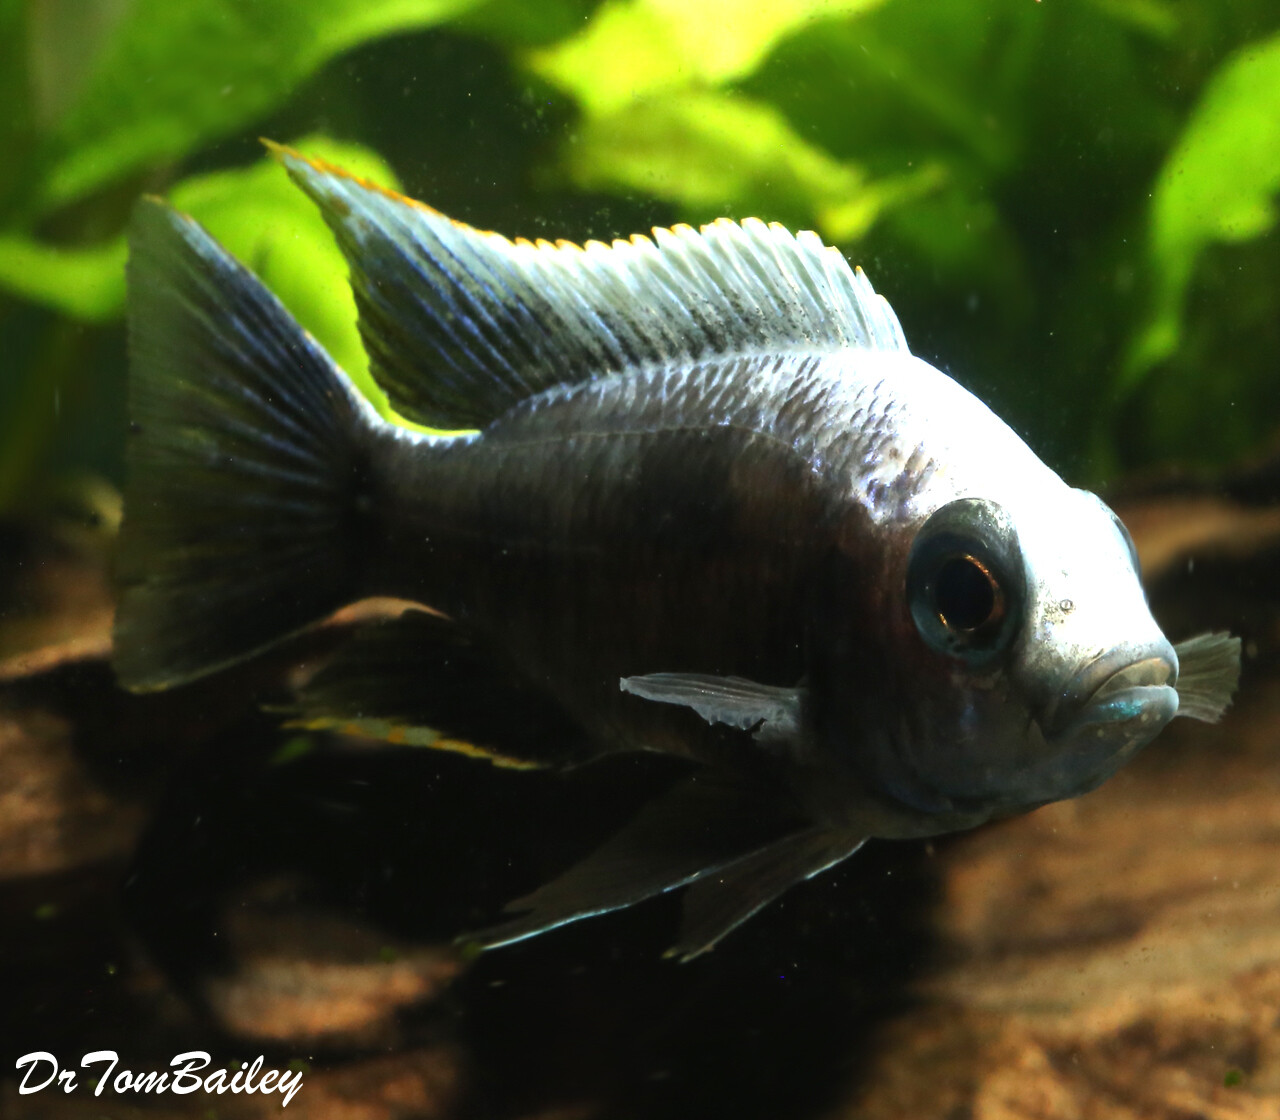 Premium PAIR of Lake Malawi Copadichromis Trewavasae, one male and one female, in our Tank S-56